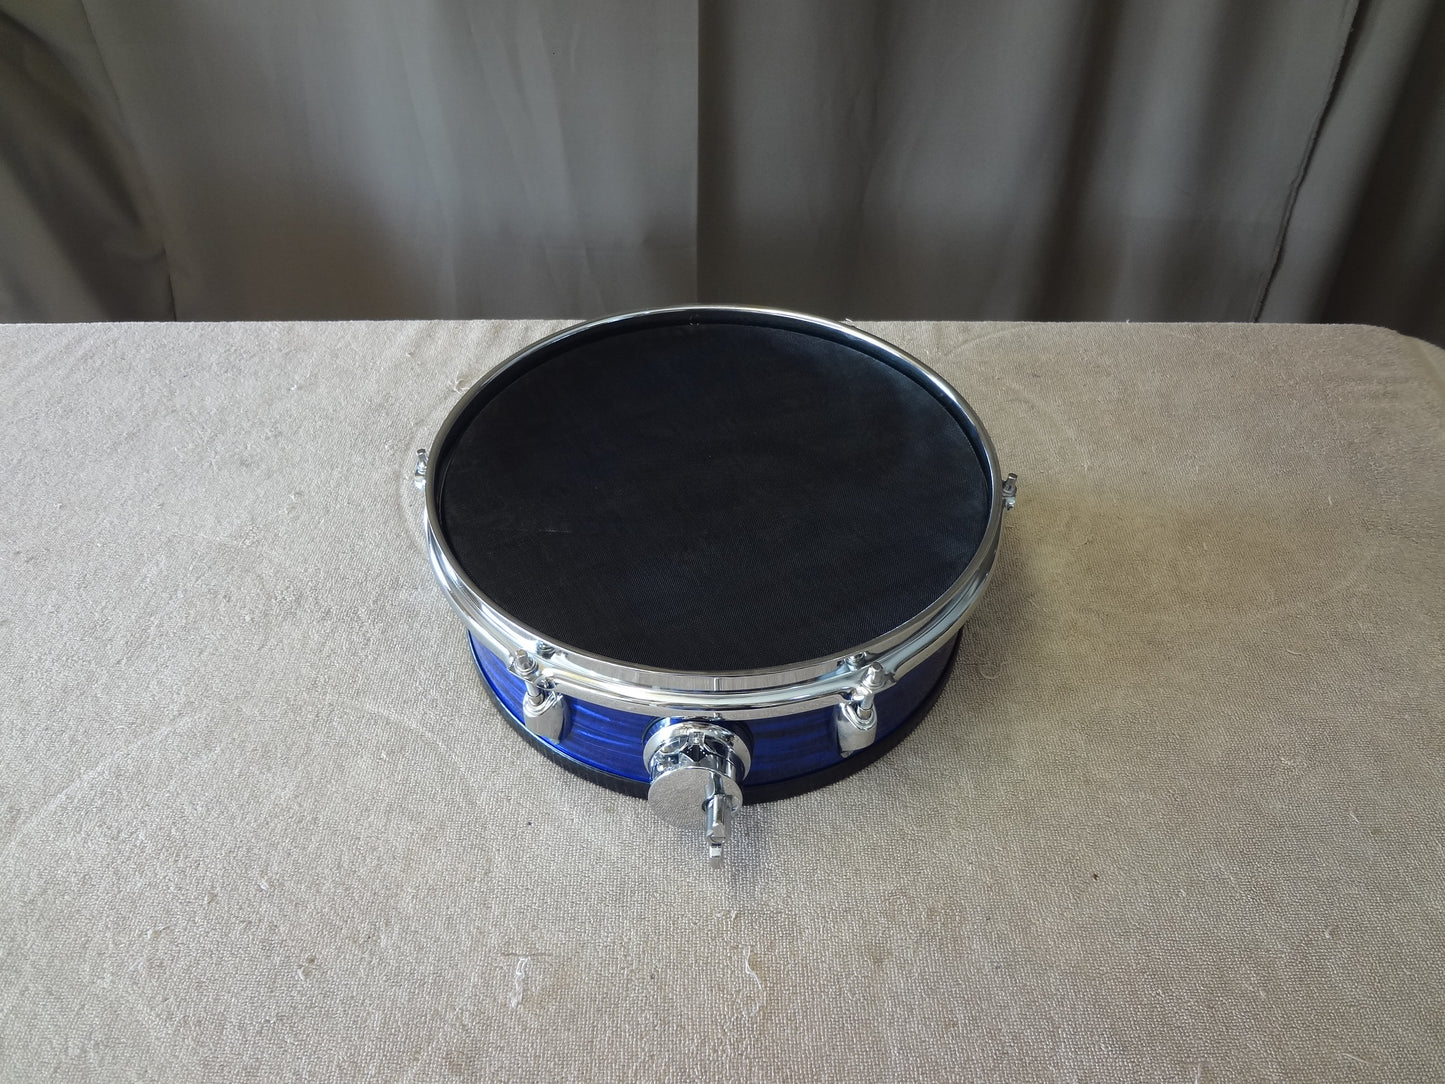 NEW 12''CUSTOM ELECTRONIC SNARE DRUM - BLUE OYSTER